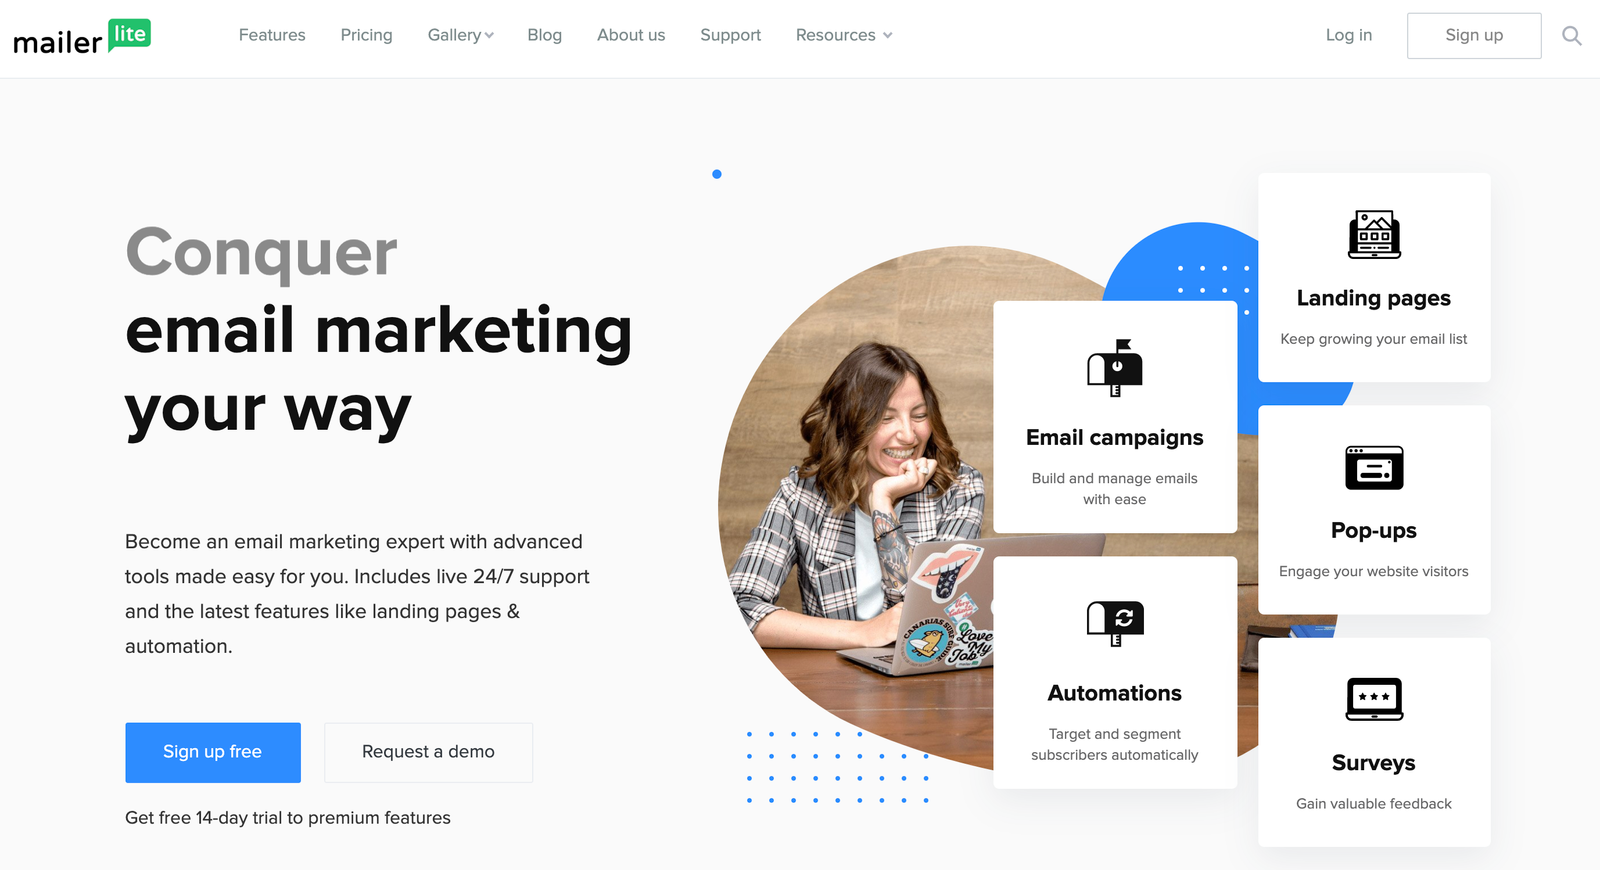 mailerlite email campaigns